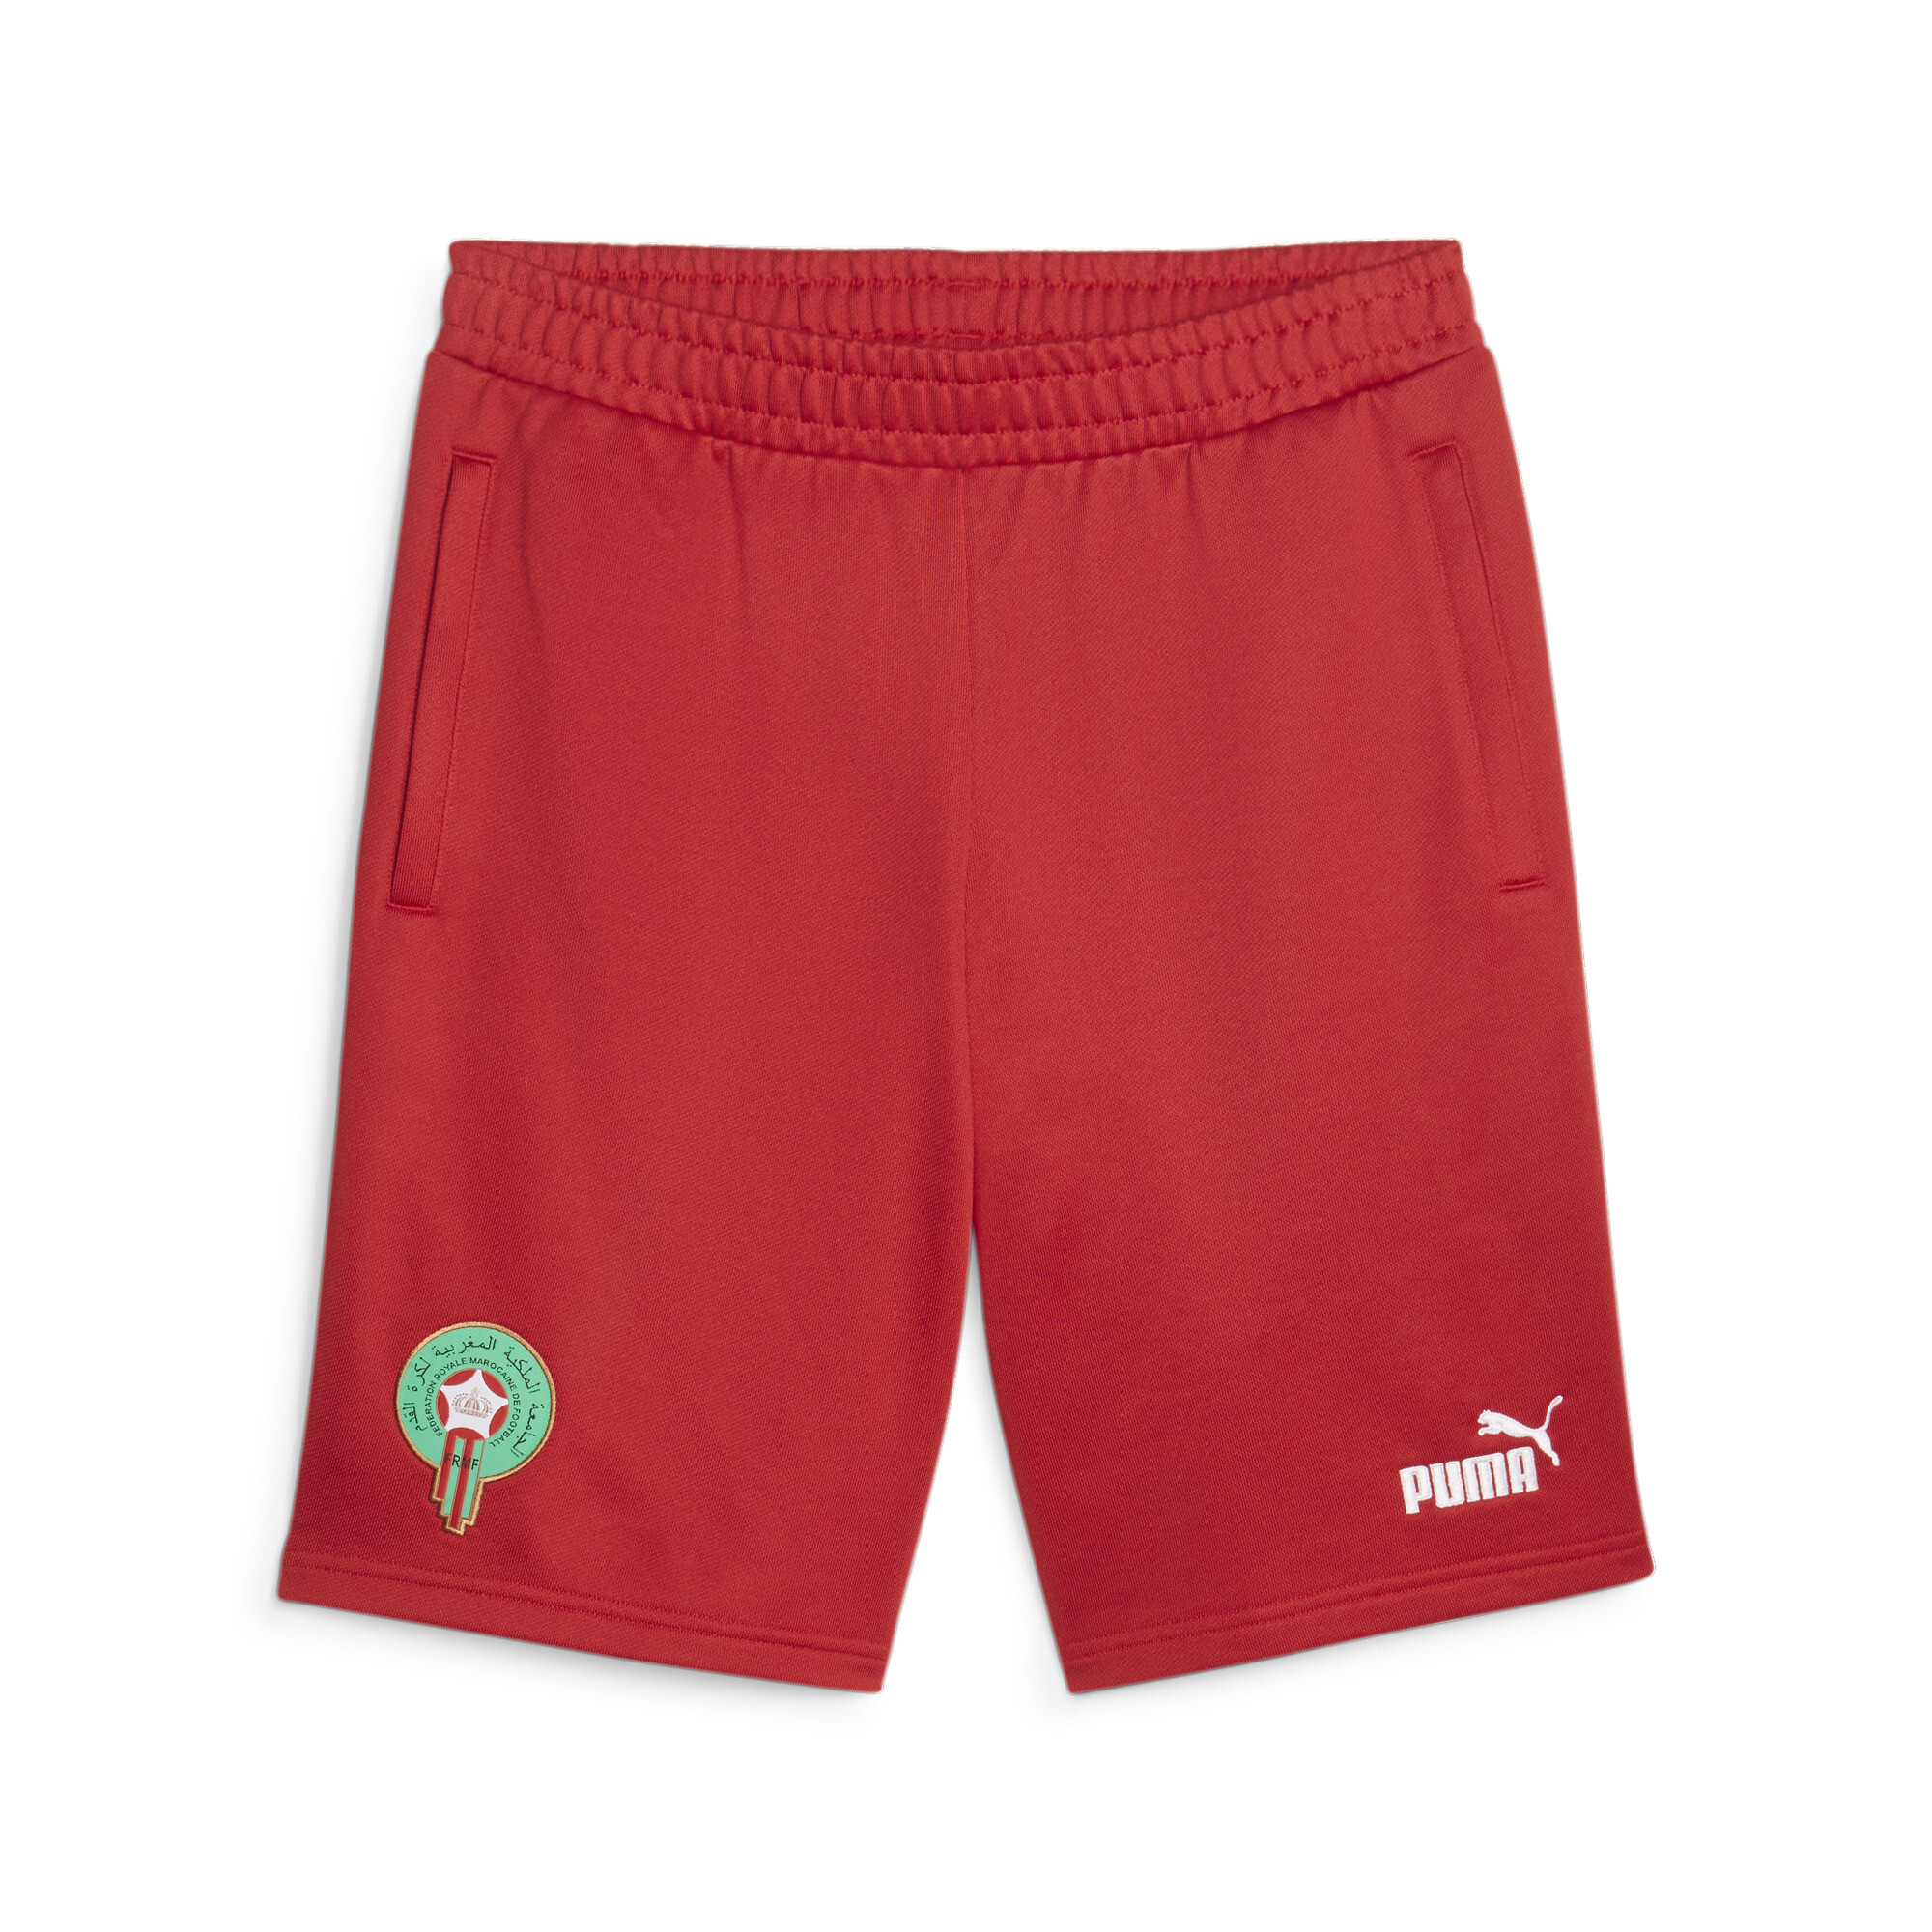 Men's Puma Morocco Ftbl Culture Shorts, Red, Size XS, Clothing